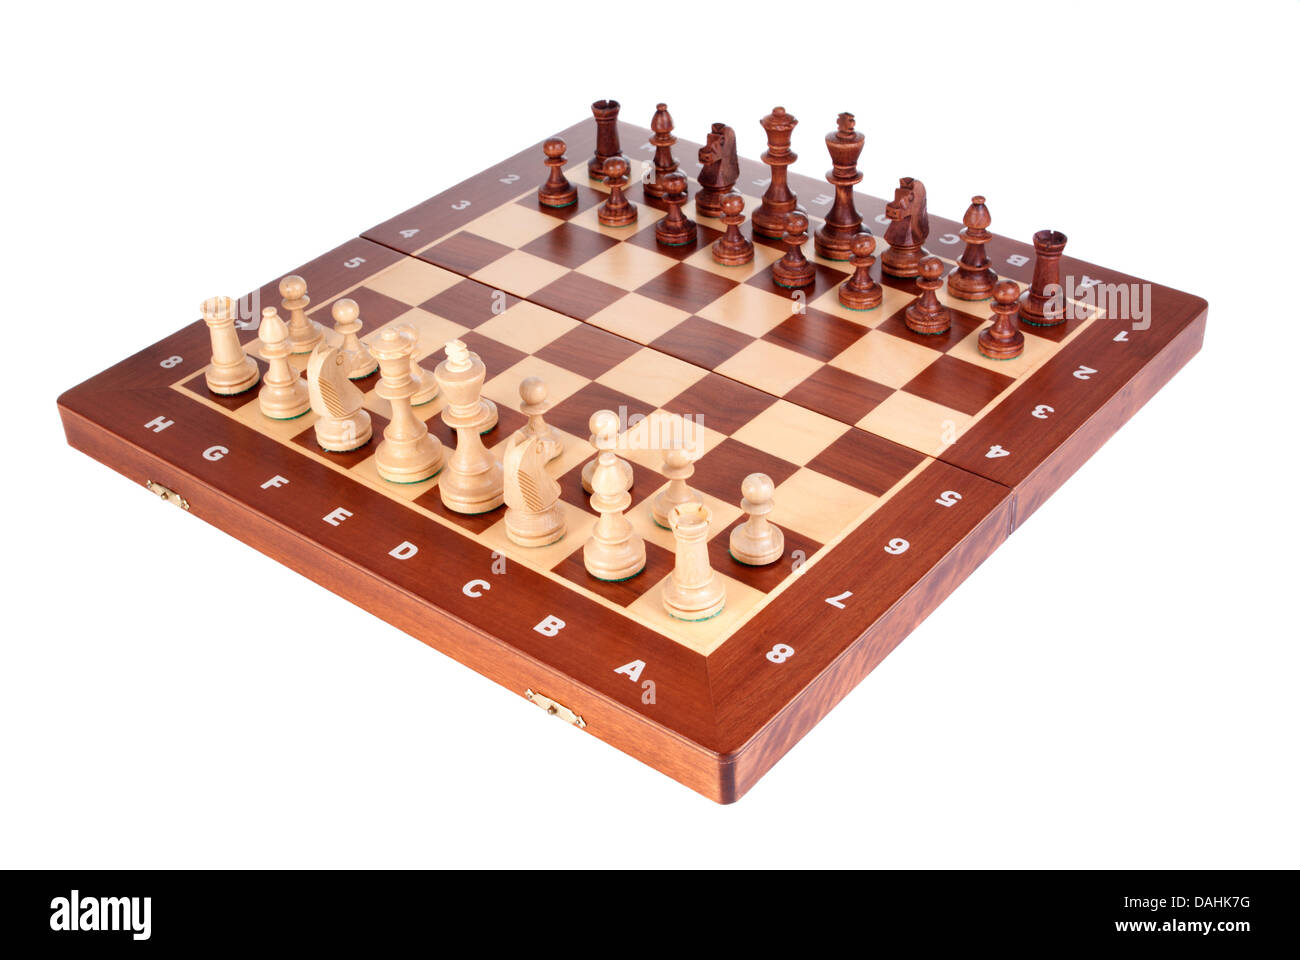 Wooden Chessboard with peaces ready to play on white background Stock Photo